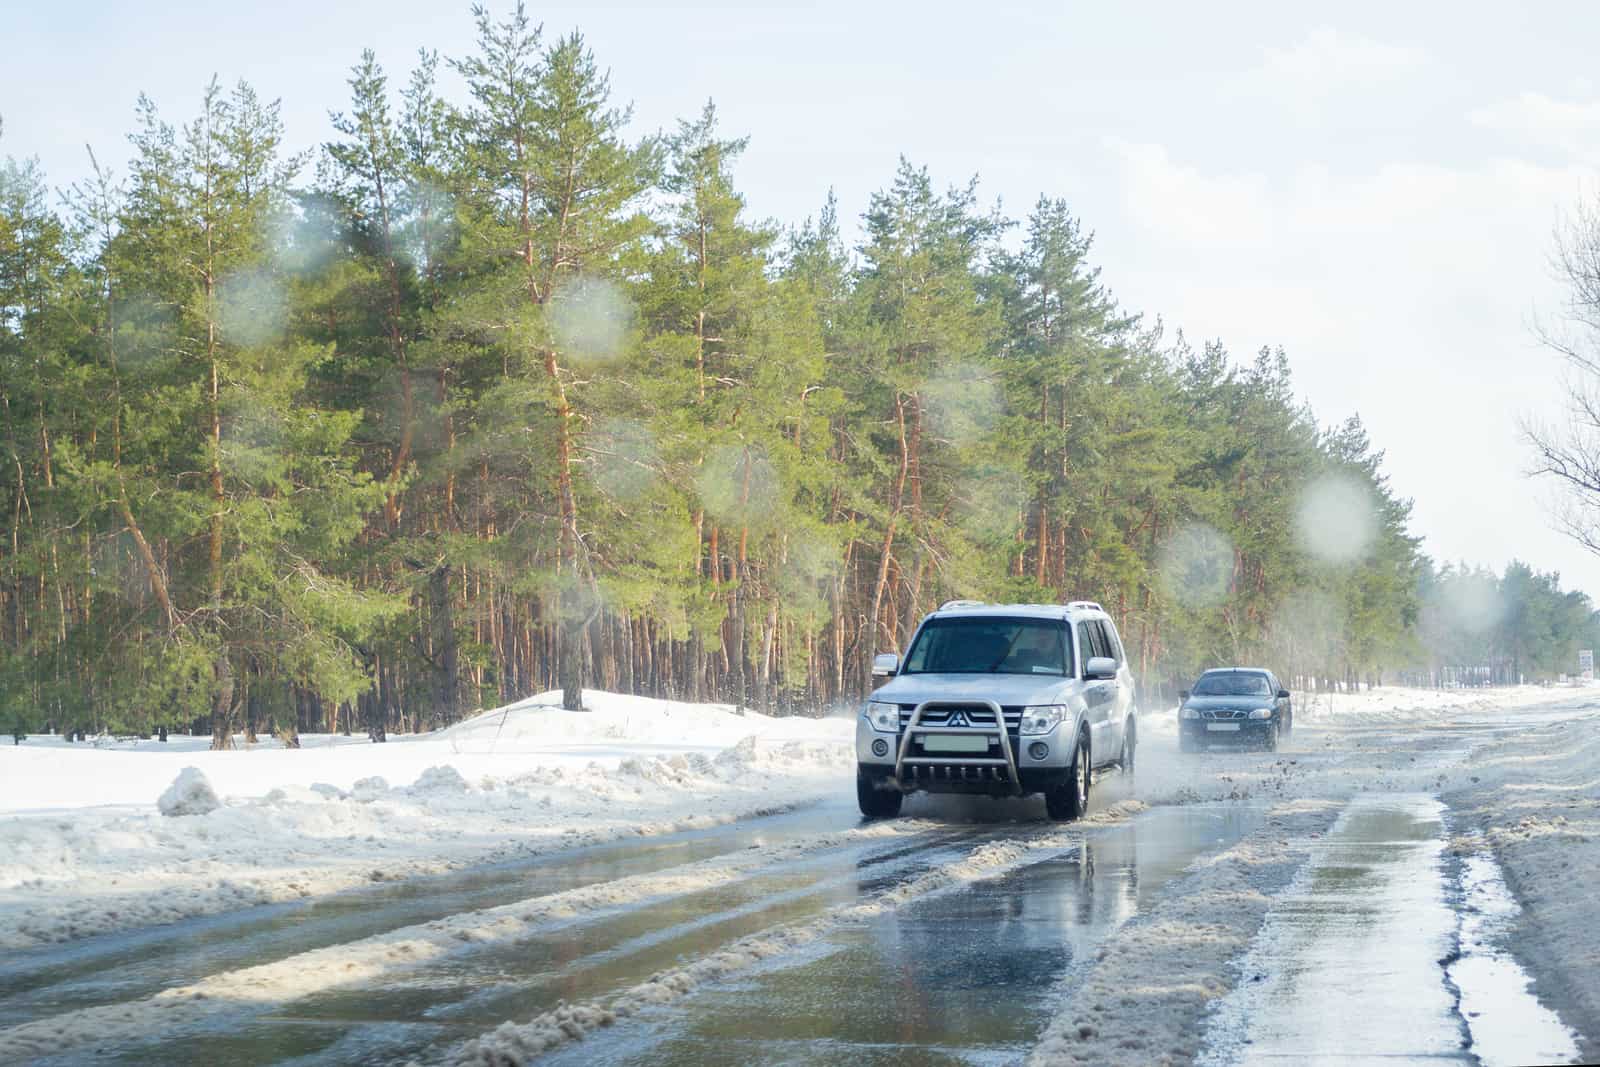 Motorists Rights in Accidents Caused by Bad Weather